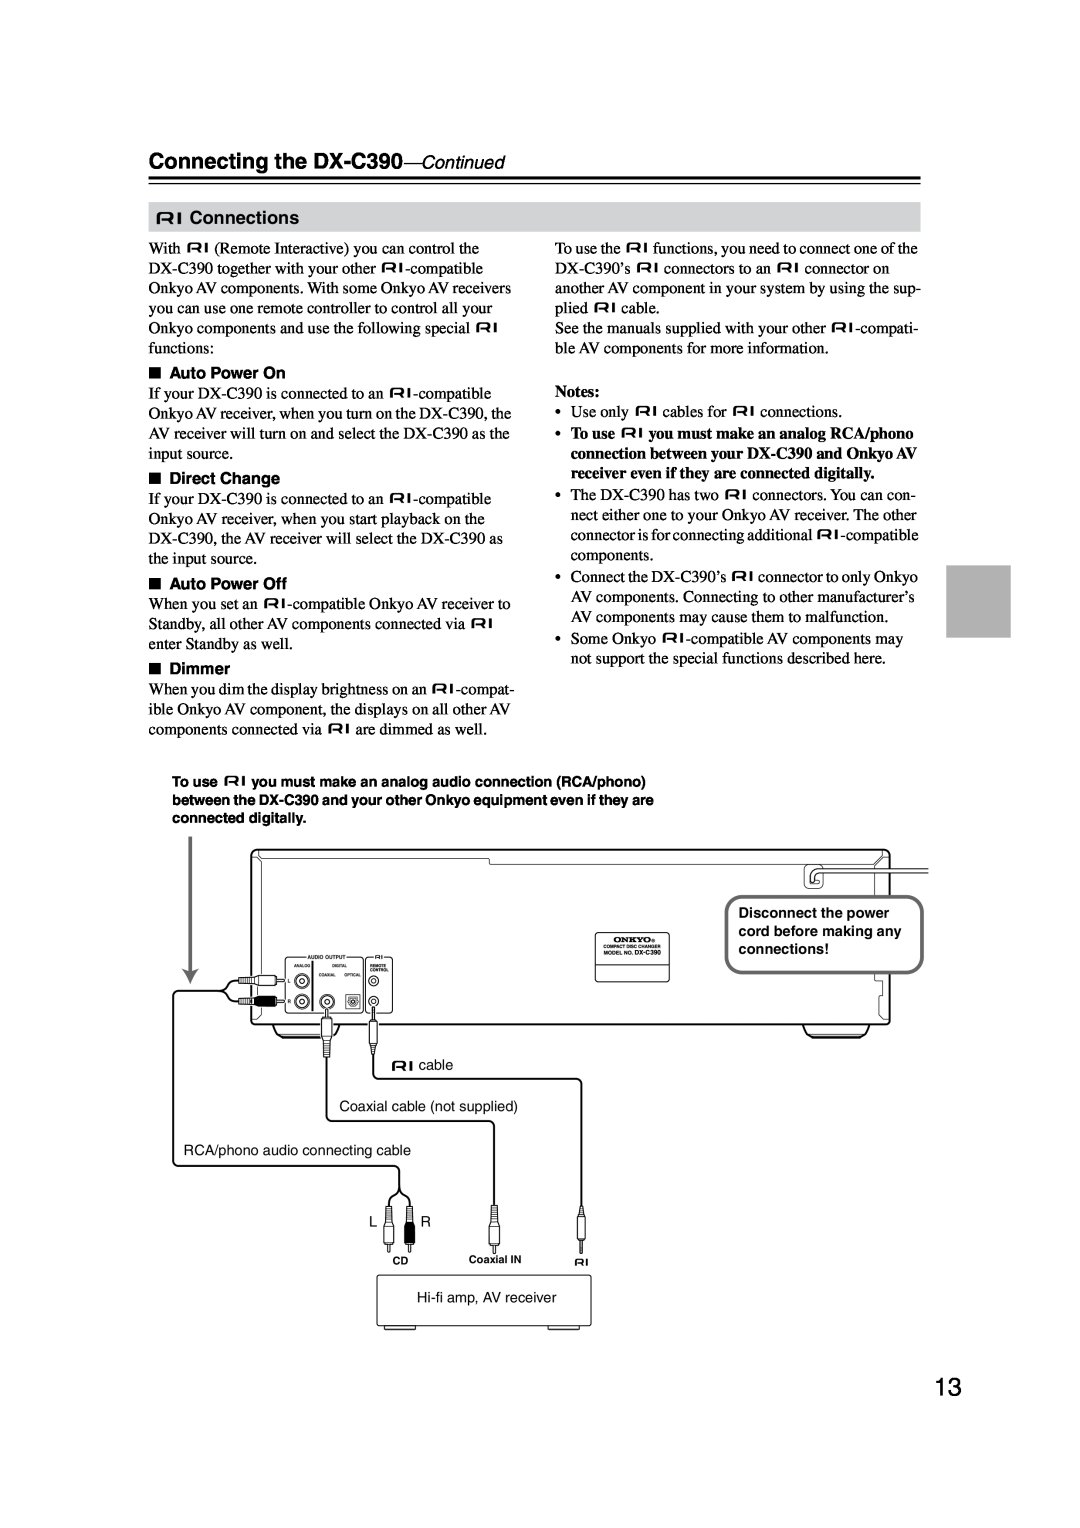 Onkyo instruction manual Connecting the DX-C390-Continued, Connections 